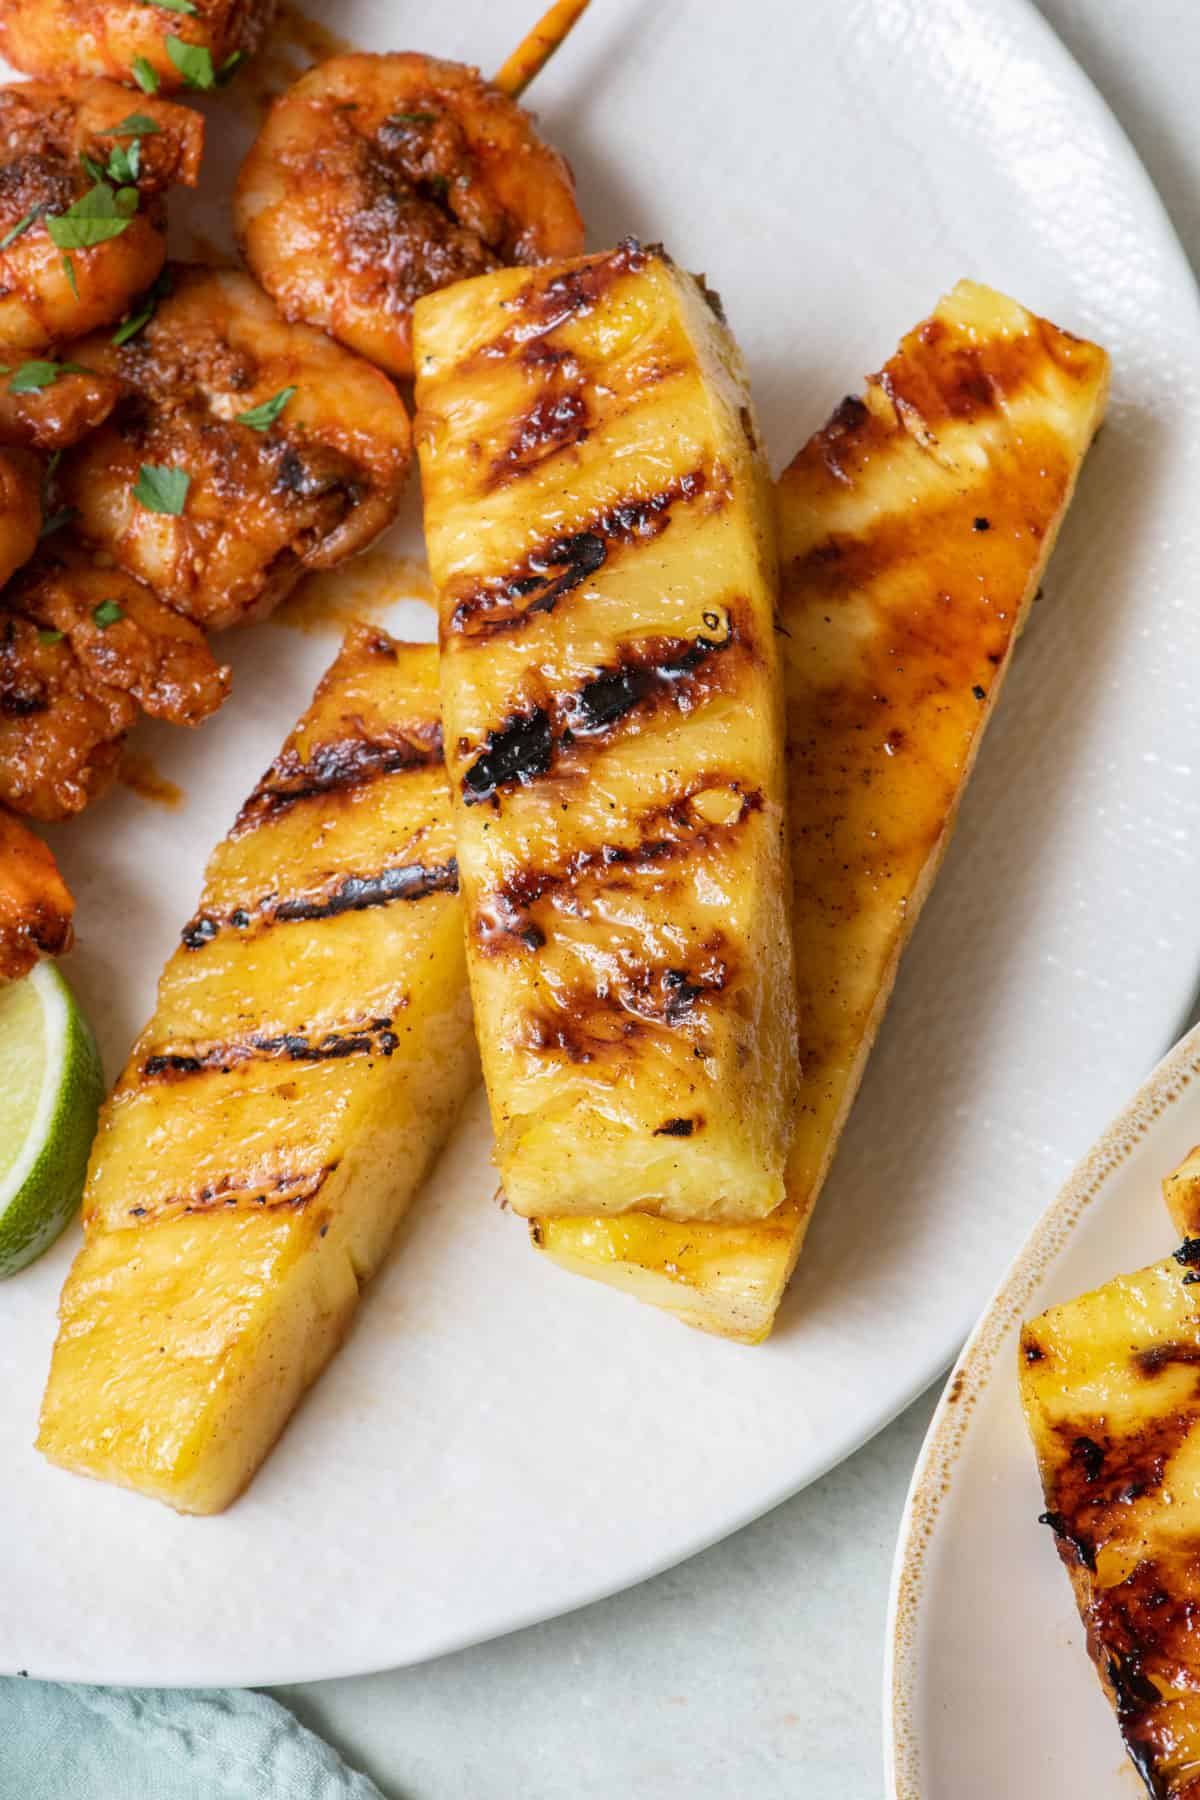 Three grilled pineapple spears on a plate next to shrimp skewers.